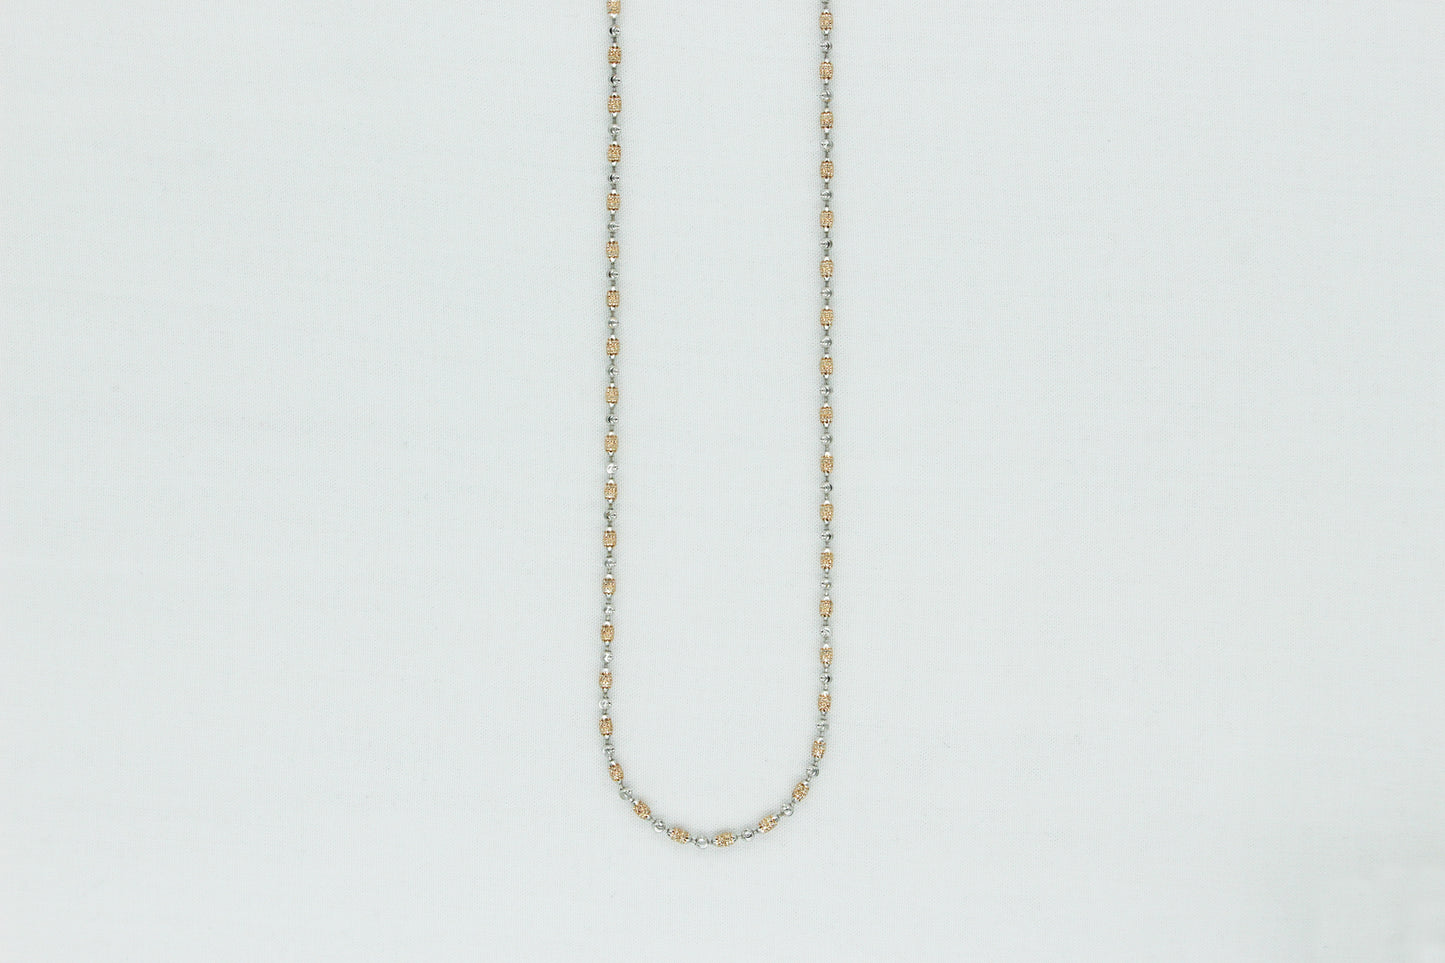 Sparkling Bead Chain in 18K(2.1mm x 2.1mm)